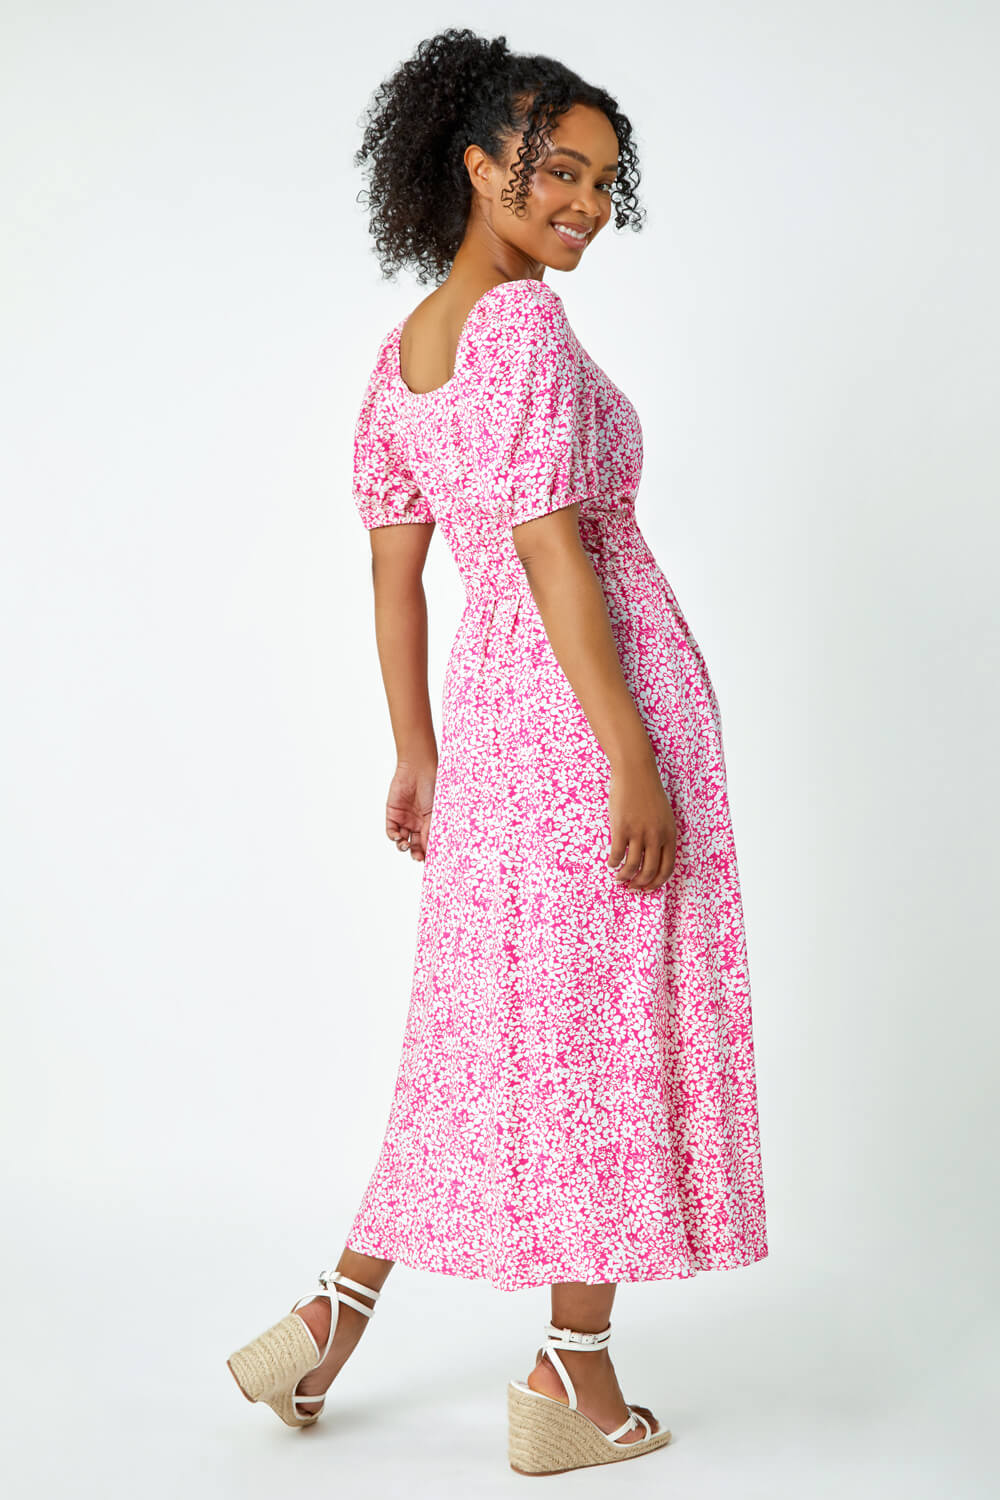 PINK Petite Ditsy Floral Stretch Midi Dress, Image 3 of 6